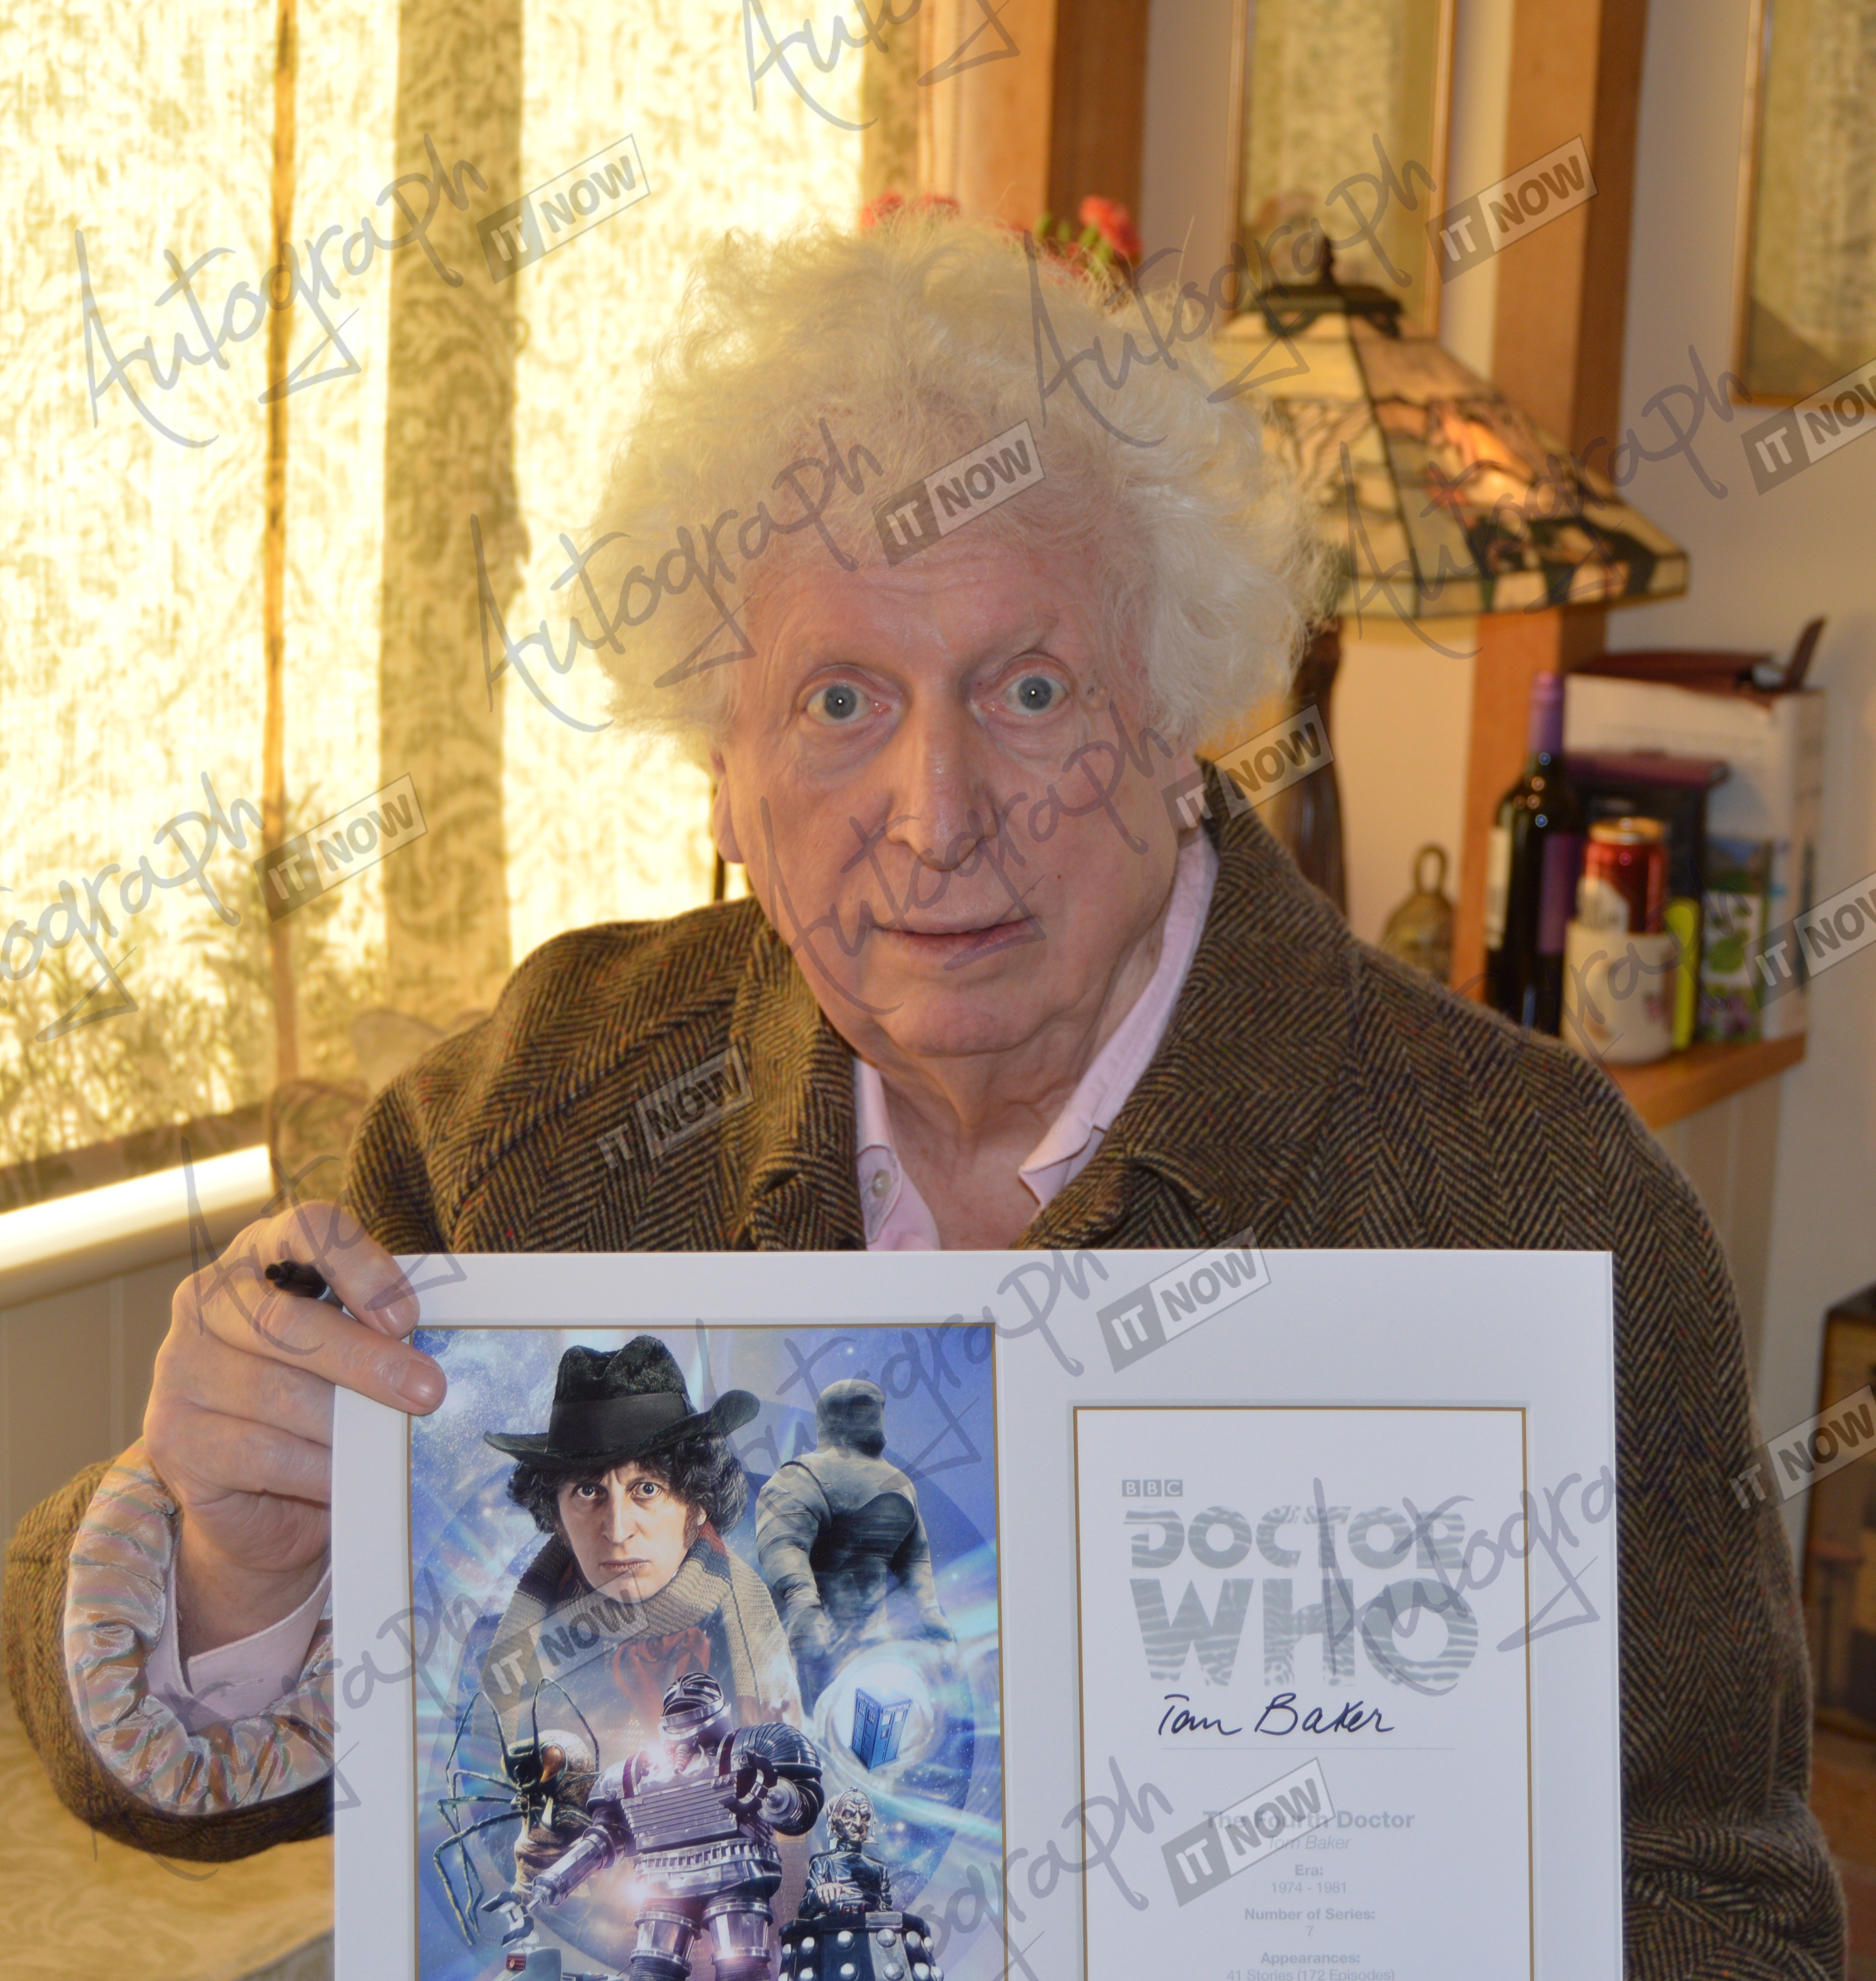 Dr Who "The Hand of Fear" Episode Signed by Tom Baker 